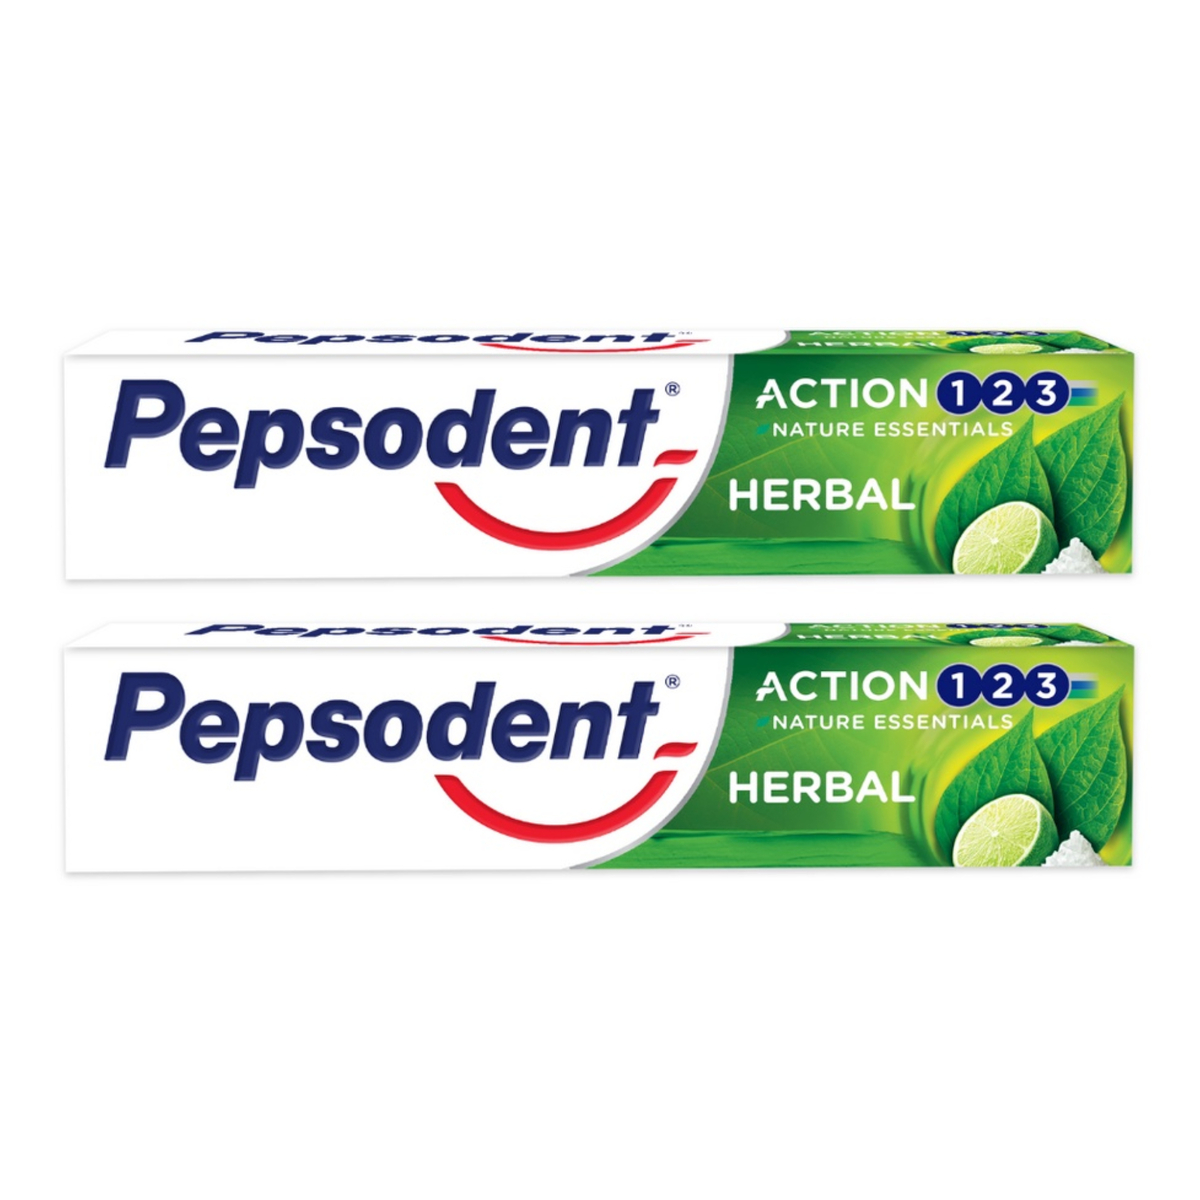 Pepsodent TP Active Herbal + White 2pcs 190g